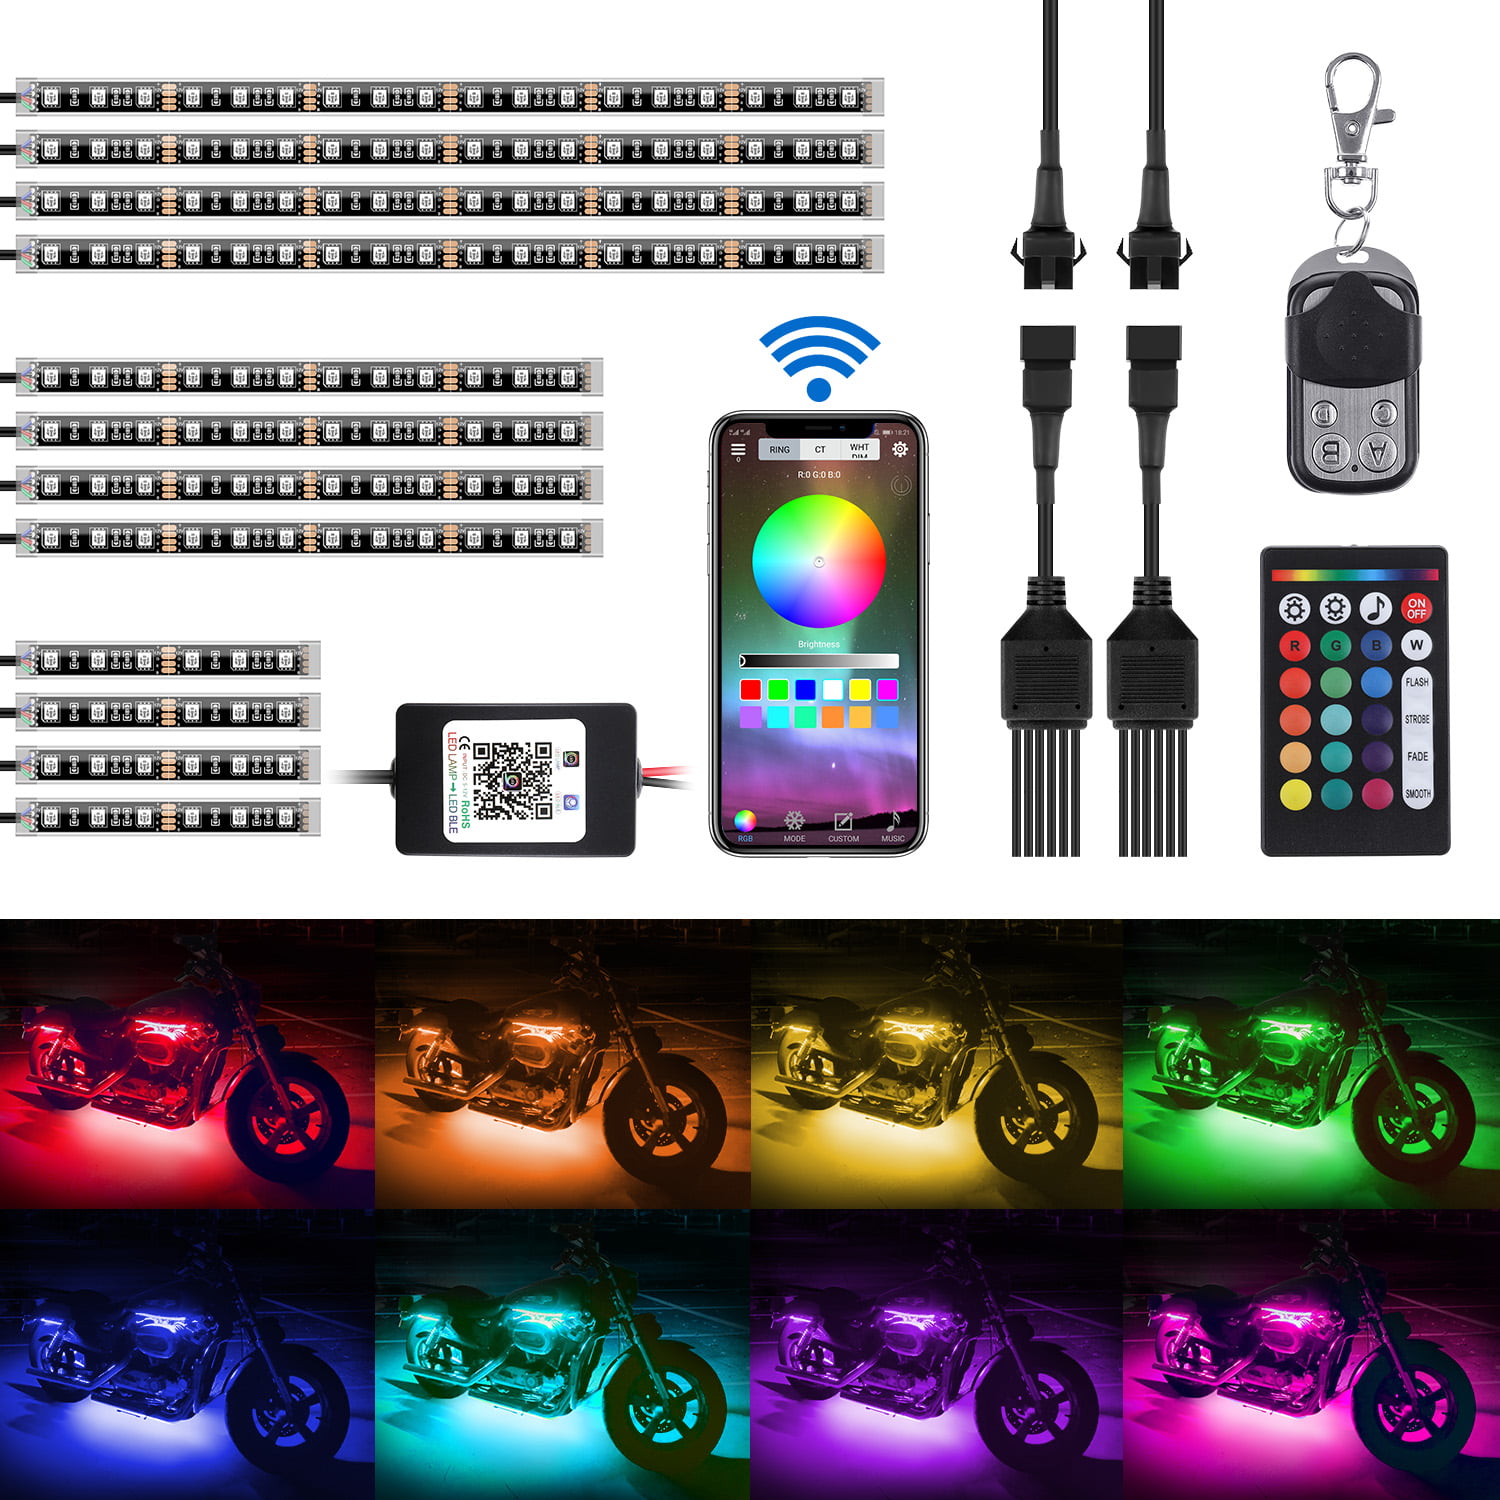 Motorcycle LED Light Kit Strips 8PCS with APP Remote Controllers Multi-Color Underglow Neon Atmosphere Lights for Harley Davidson Honda Kawasaki Suzuki 